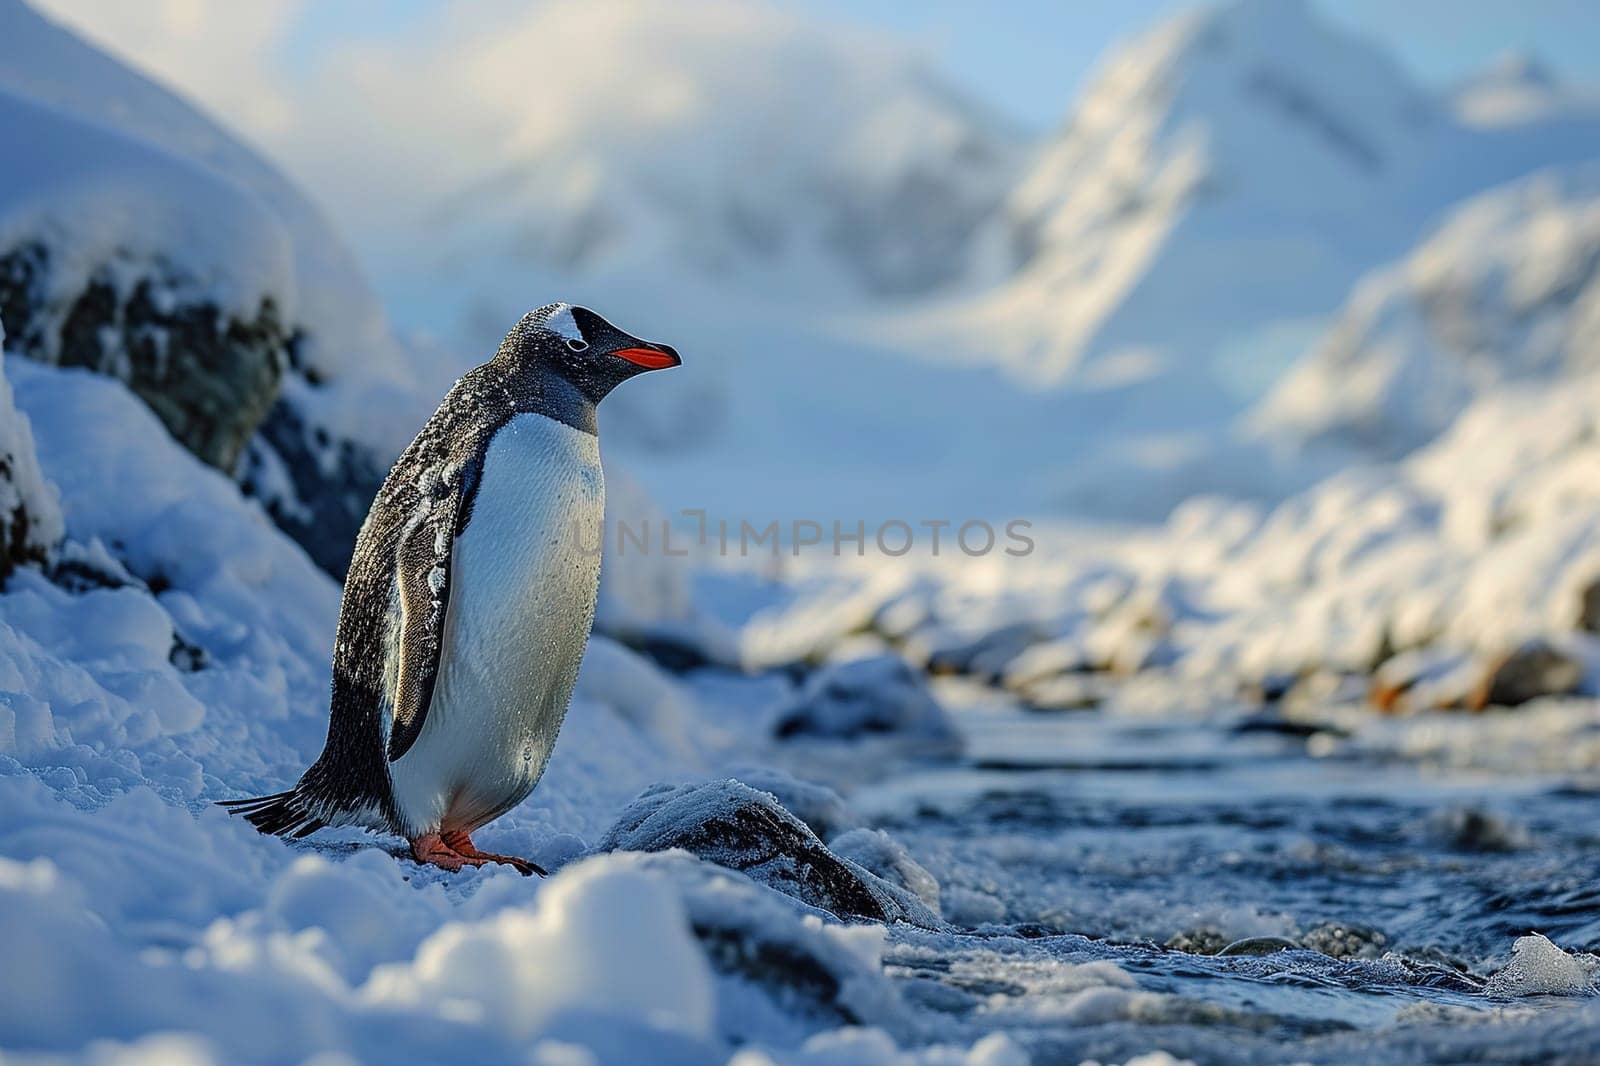 Close-up of an emperor penguin near a snow-covered rock. Generated by artificial intelligence by Vovmar